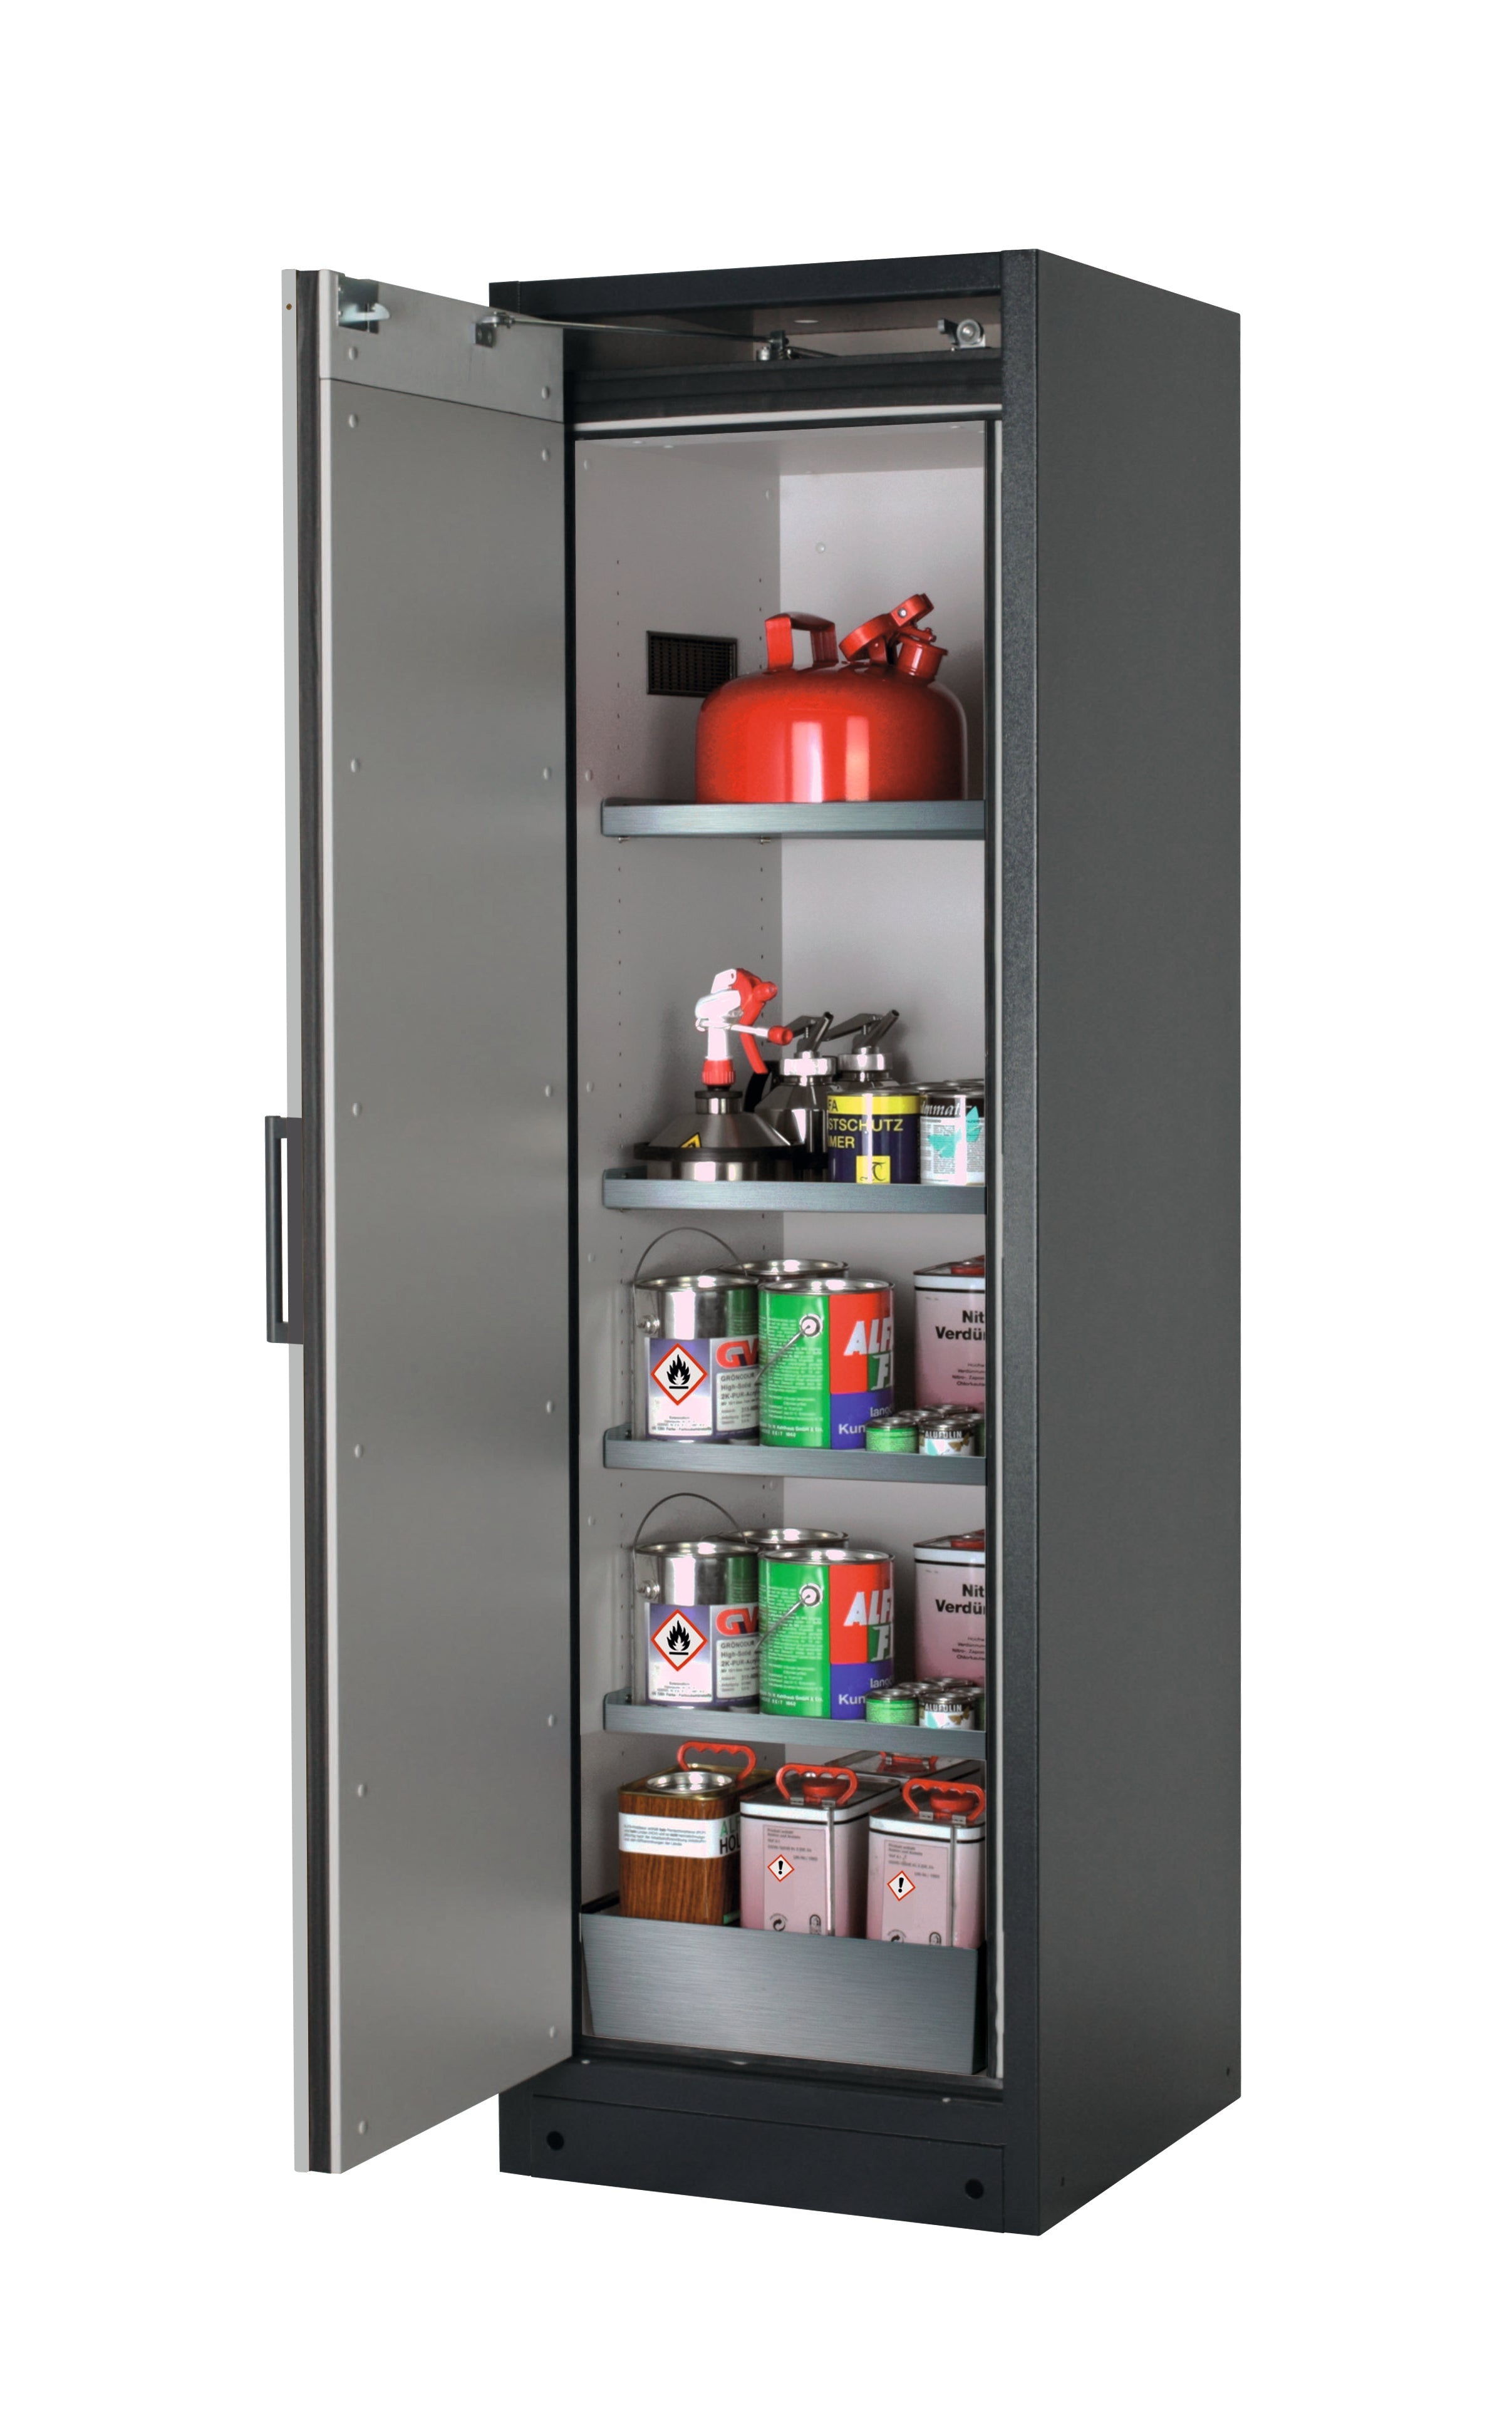 Type 90 safety storage cabinet Q-PEGASUS-90 model Q90.195.060.WDAC in pure white RAL 9010 with 4x shelf standard (stainless steel 1.4301),